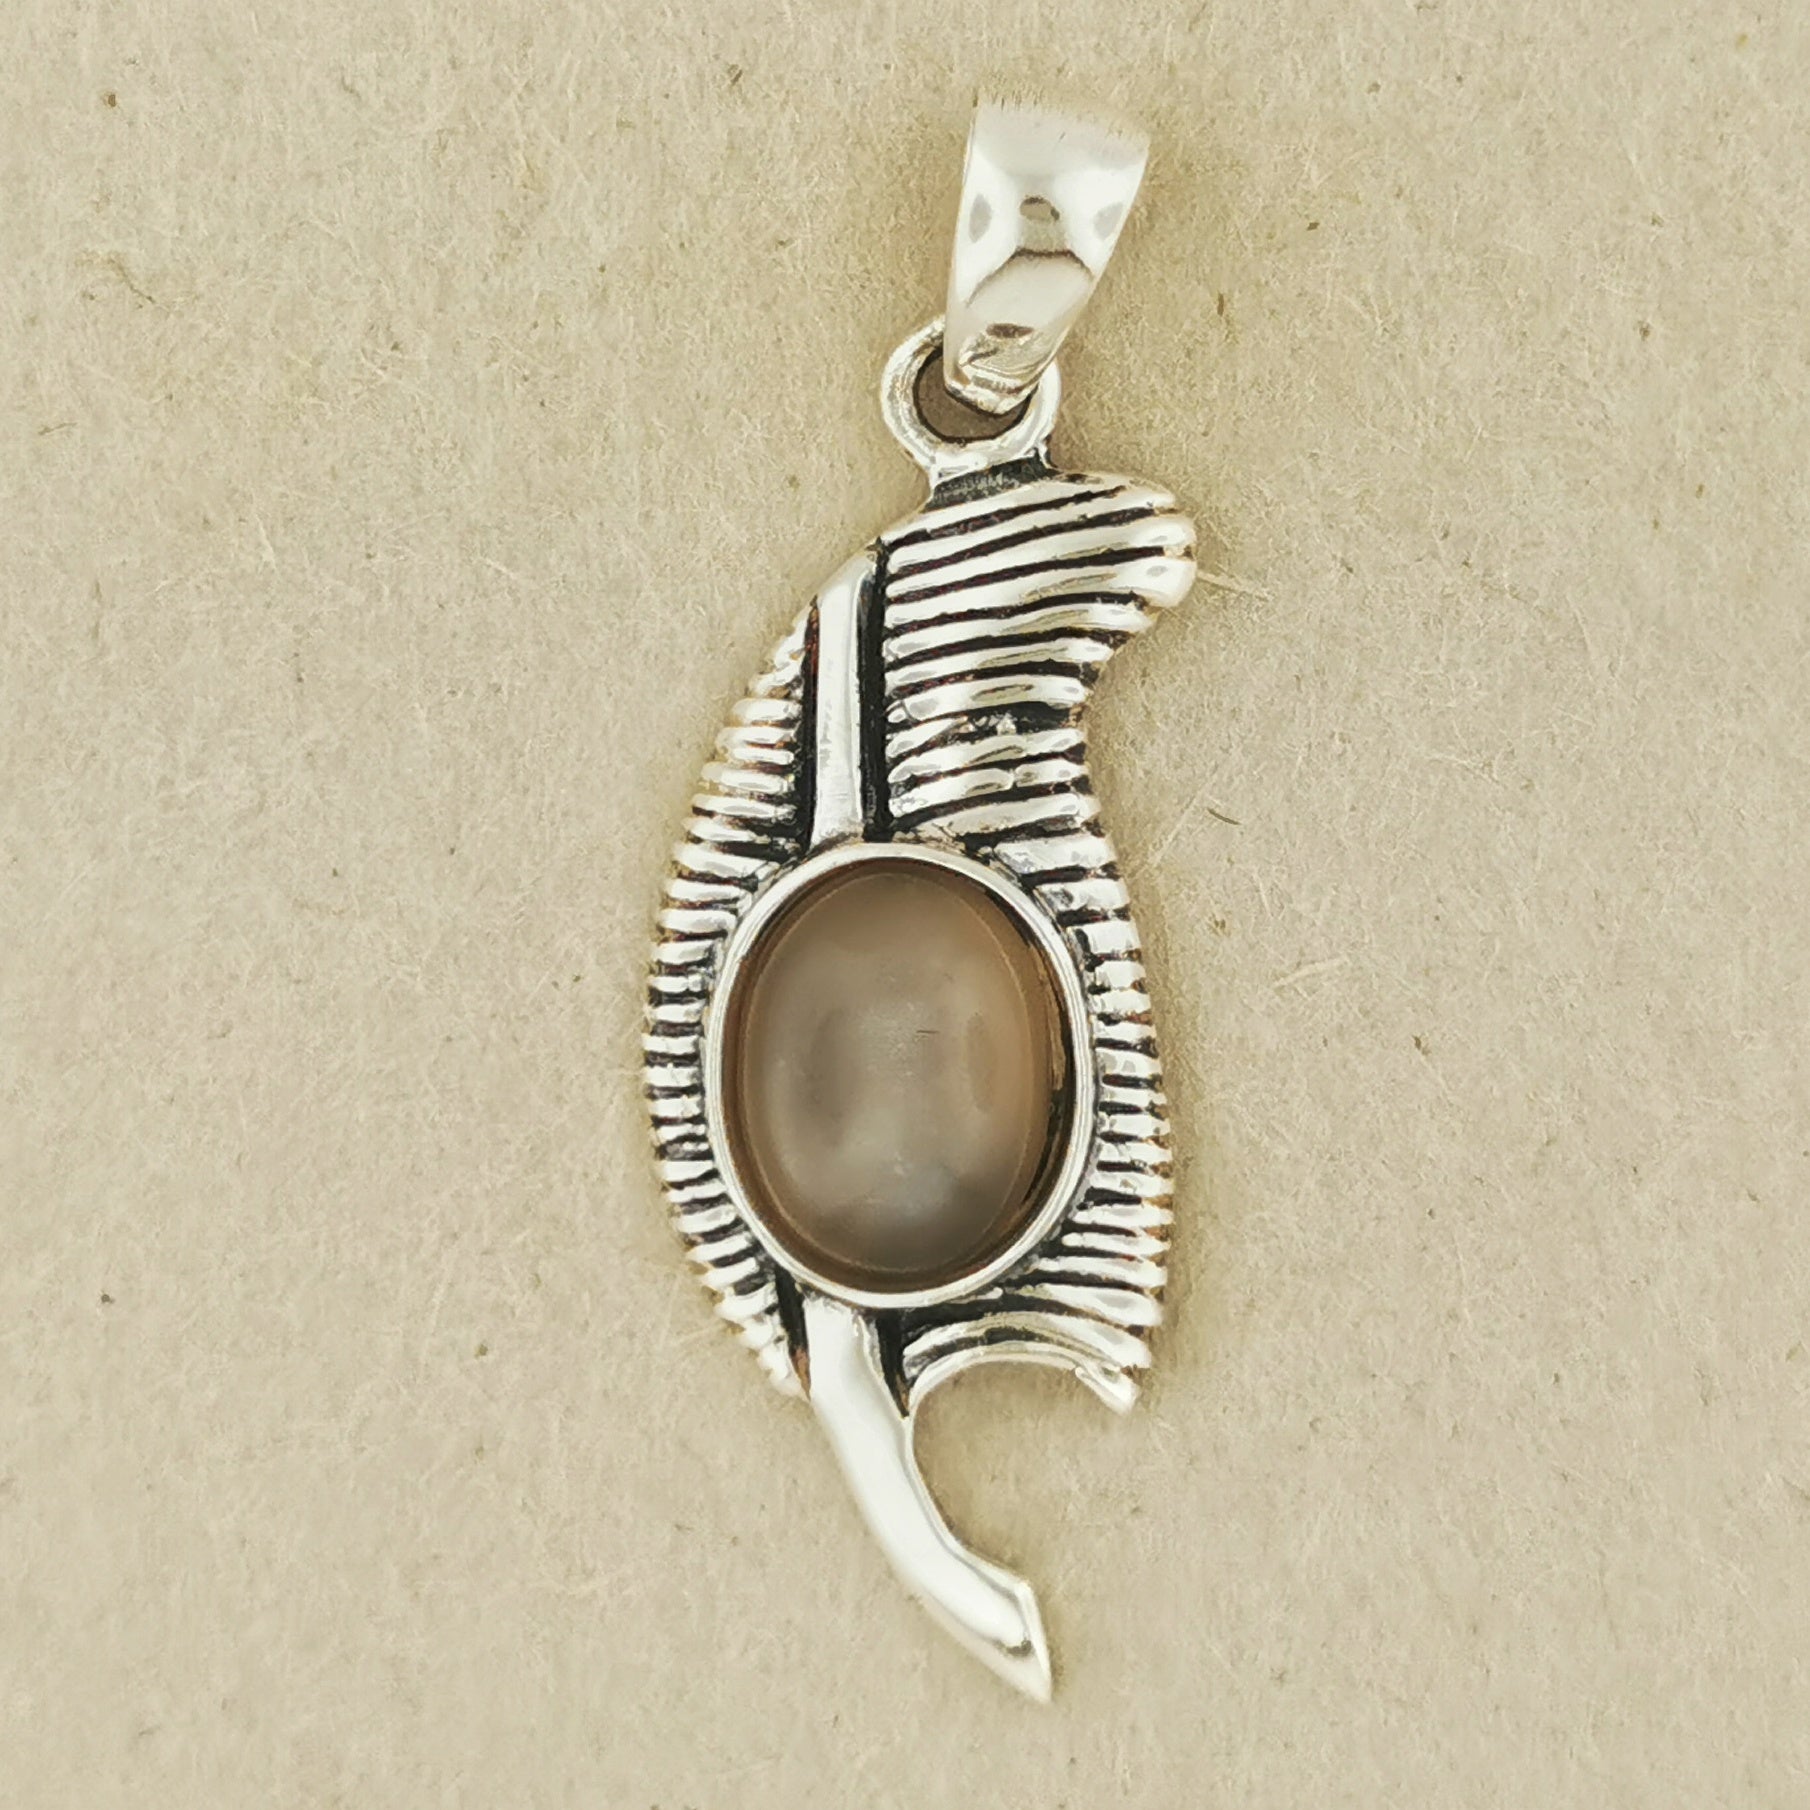 Feather of Ma'at Pendant in Sterling Silver with Silver Moonstone, Egyptian Feather Pendant, Egyptian Goddess Pendant, Goddess of Truth Pendant, Silver Egyptian Feather Pendant, Silver Ma’at Pendant, Egyptian Silver Pendant, Silver Gemstone Egyptian Feather Pendant